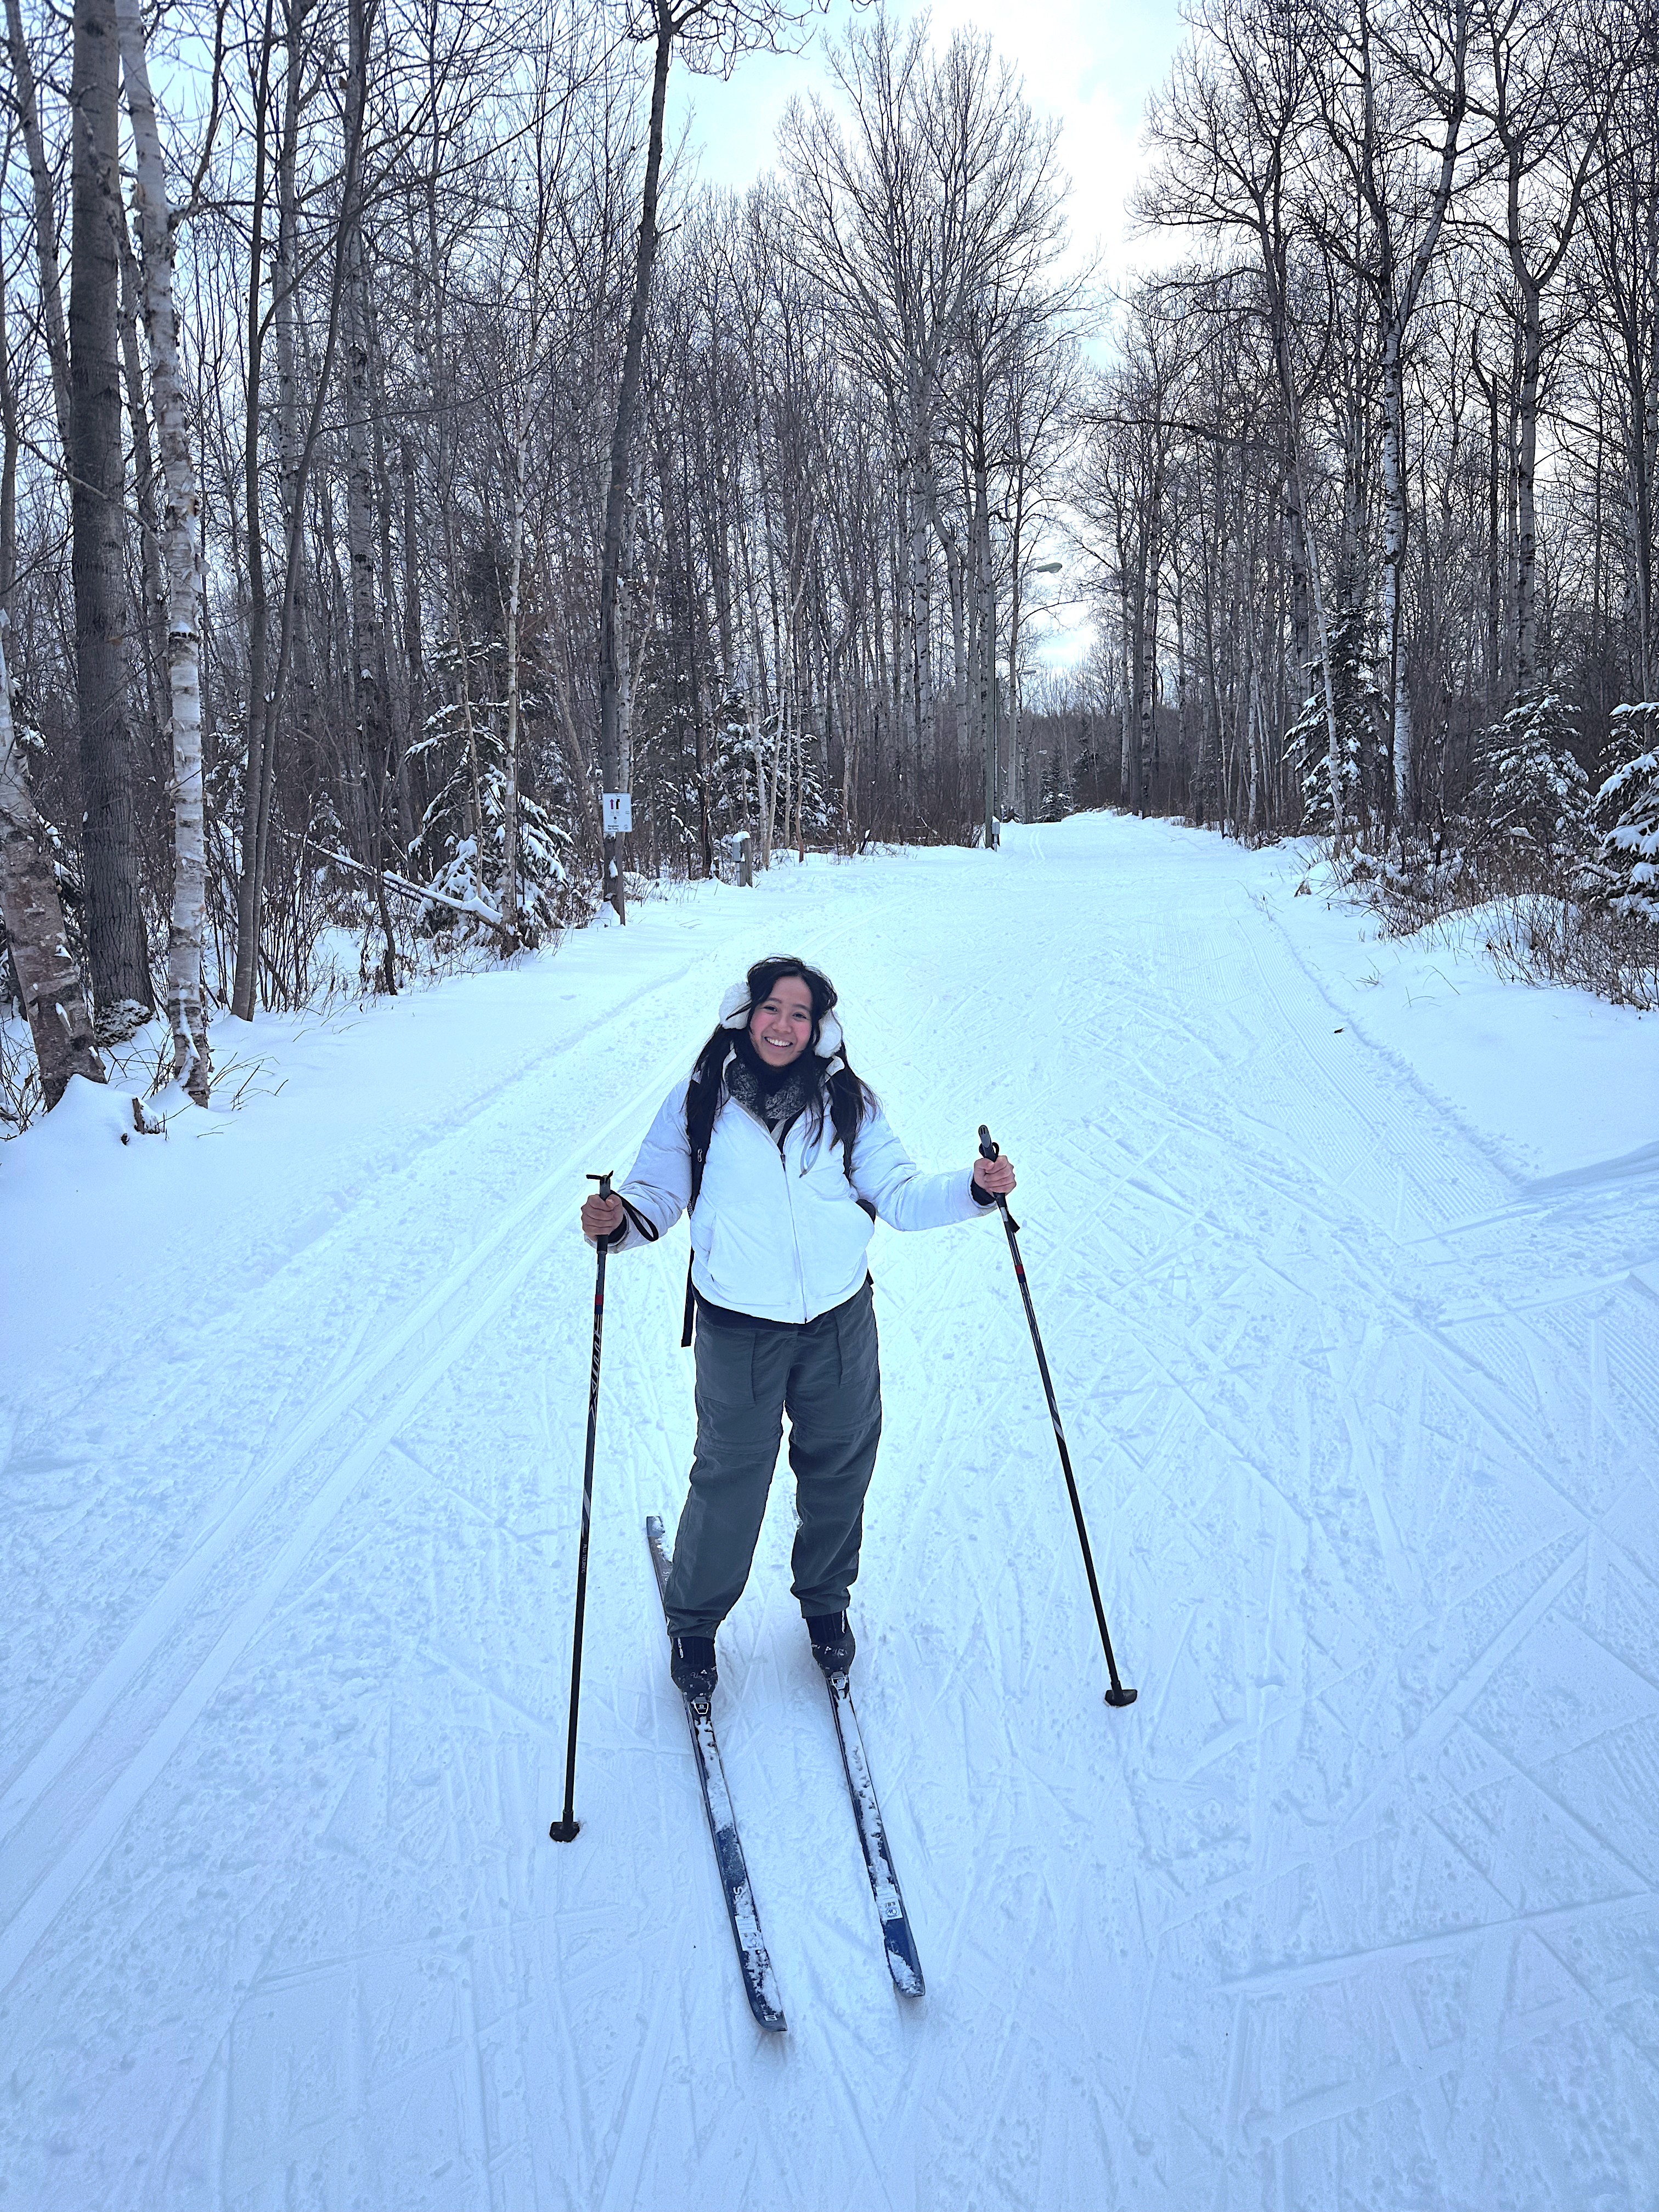 a smiling woman on cross-country skis on a snowy forested ski trail at dusk